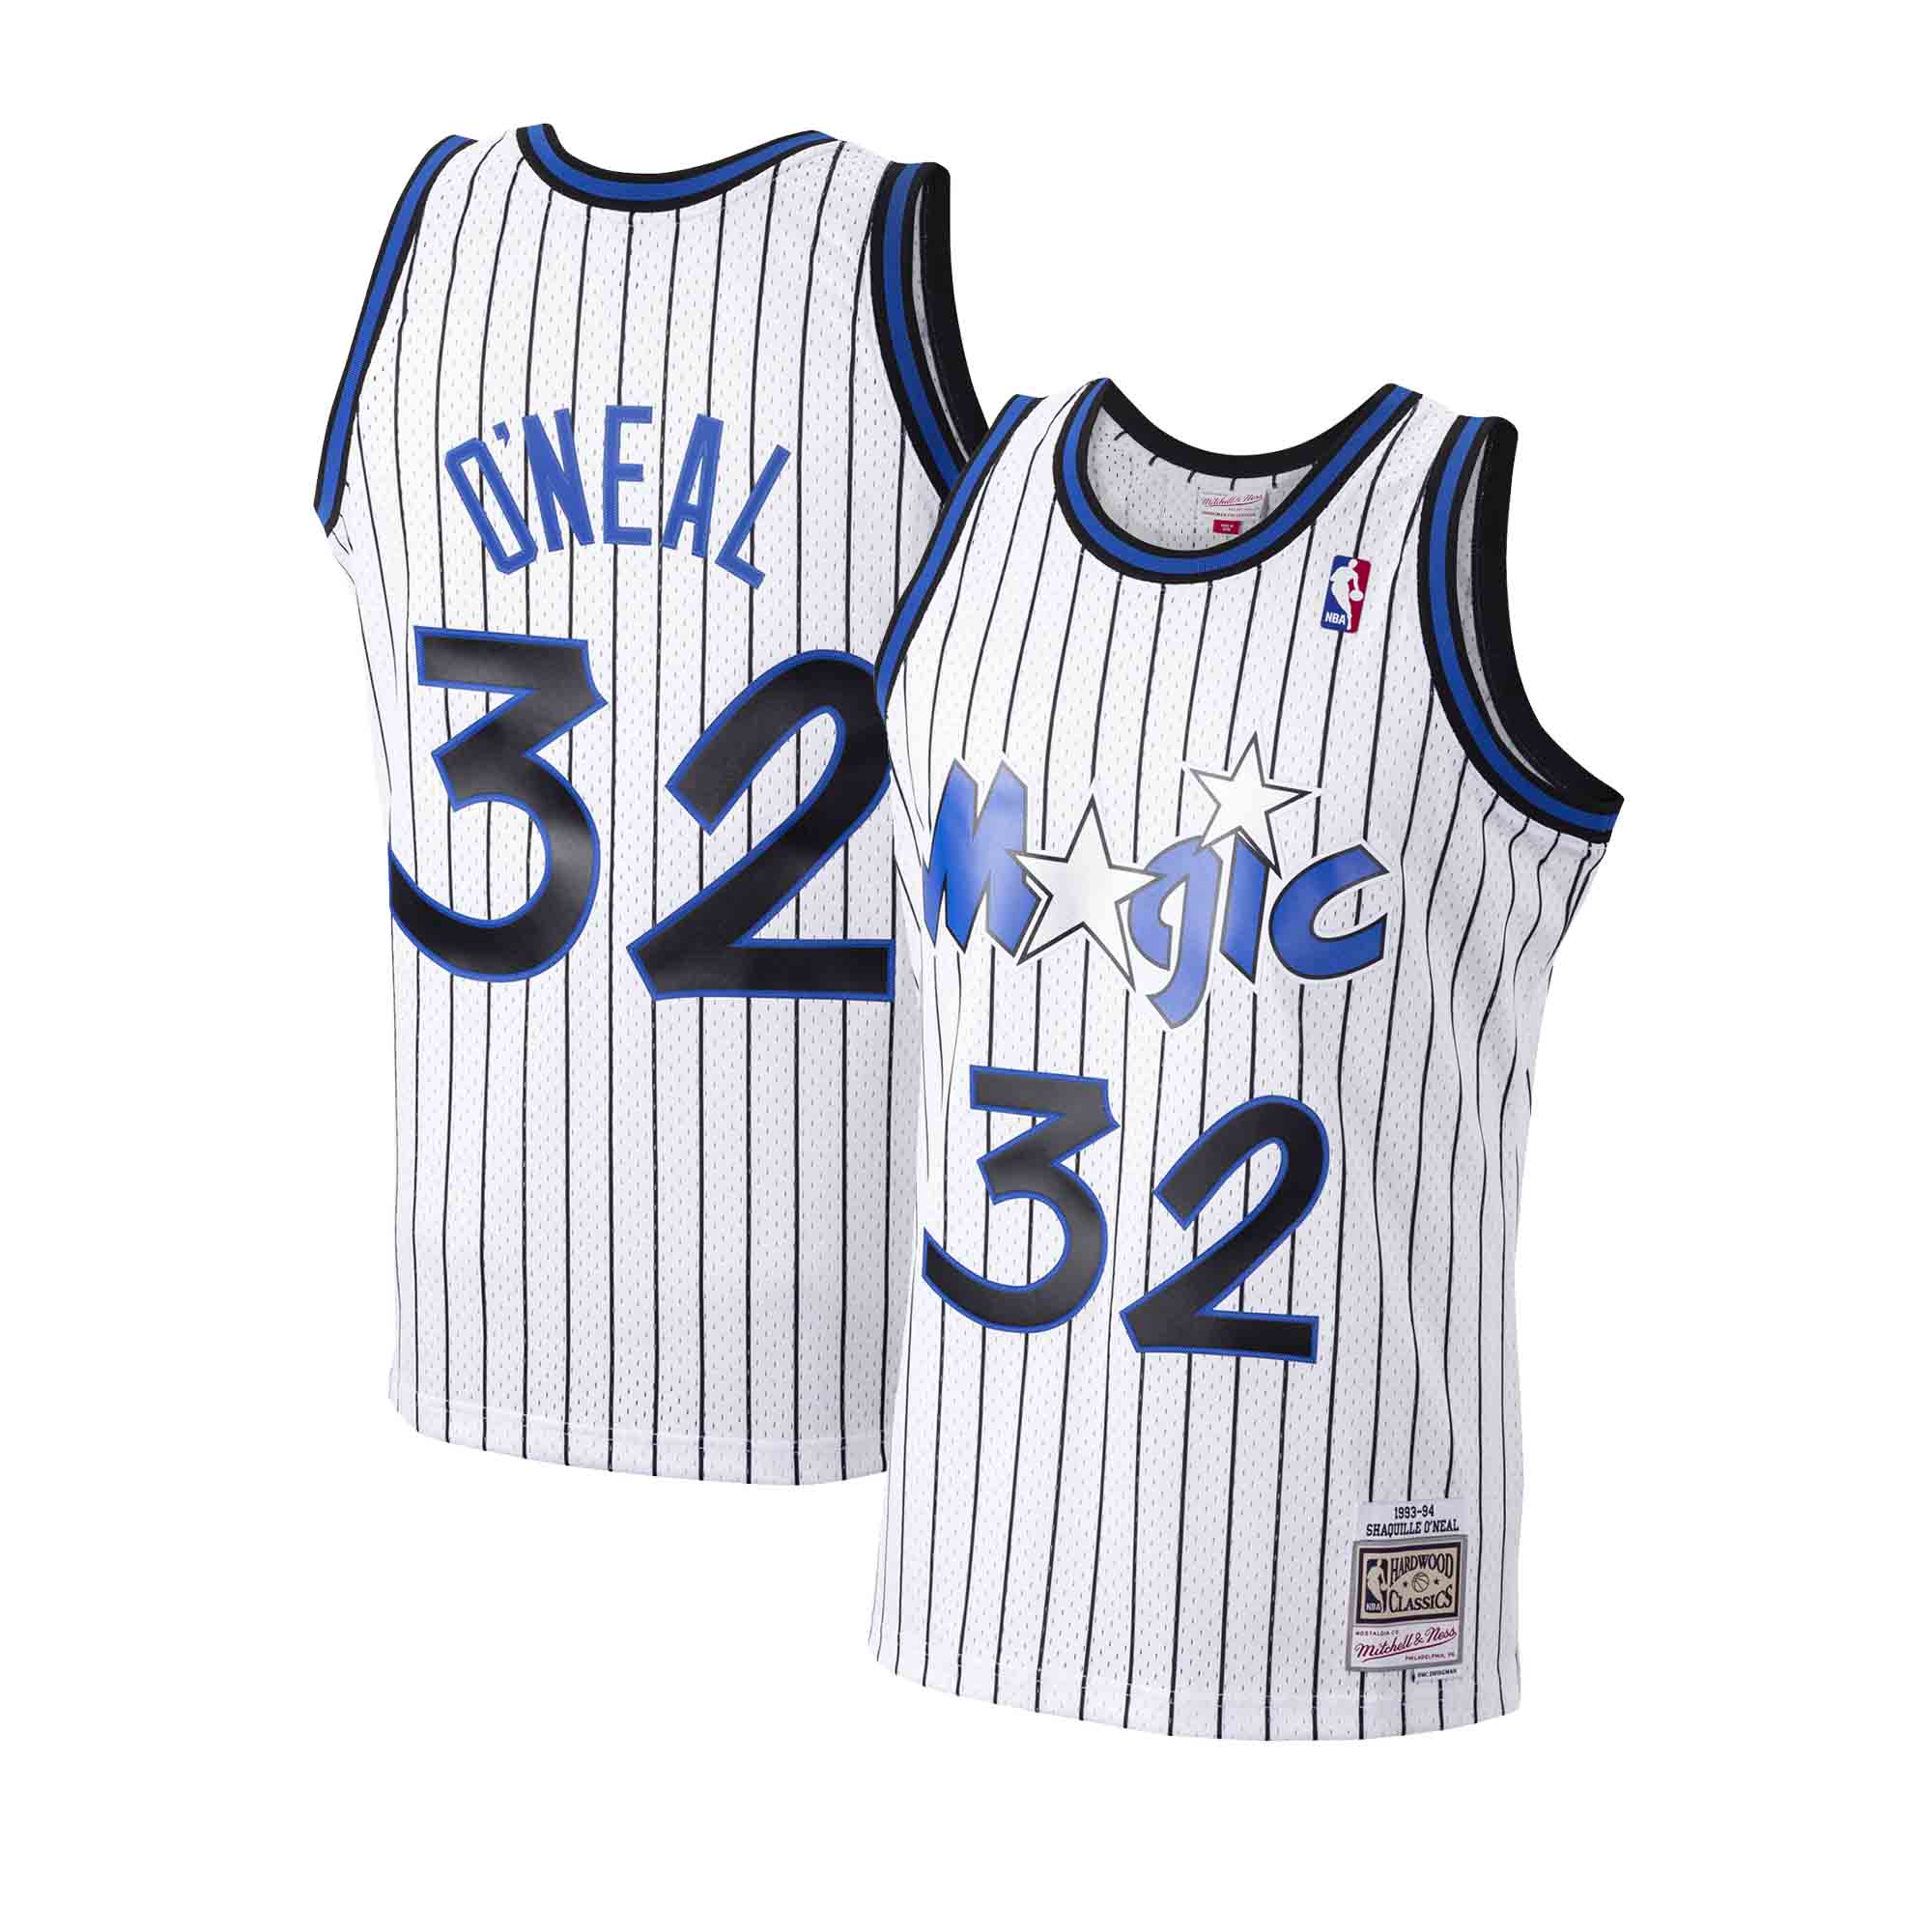 Shaquille O'Neal #32 Orlando Magic Mitchell & Ness 1993-94 Hardwood Cl -  Pro League Sports Collectibles Inc.